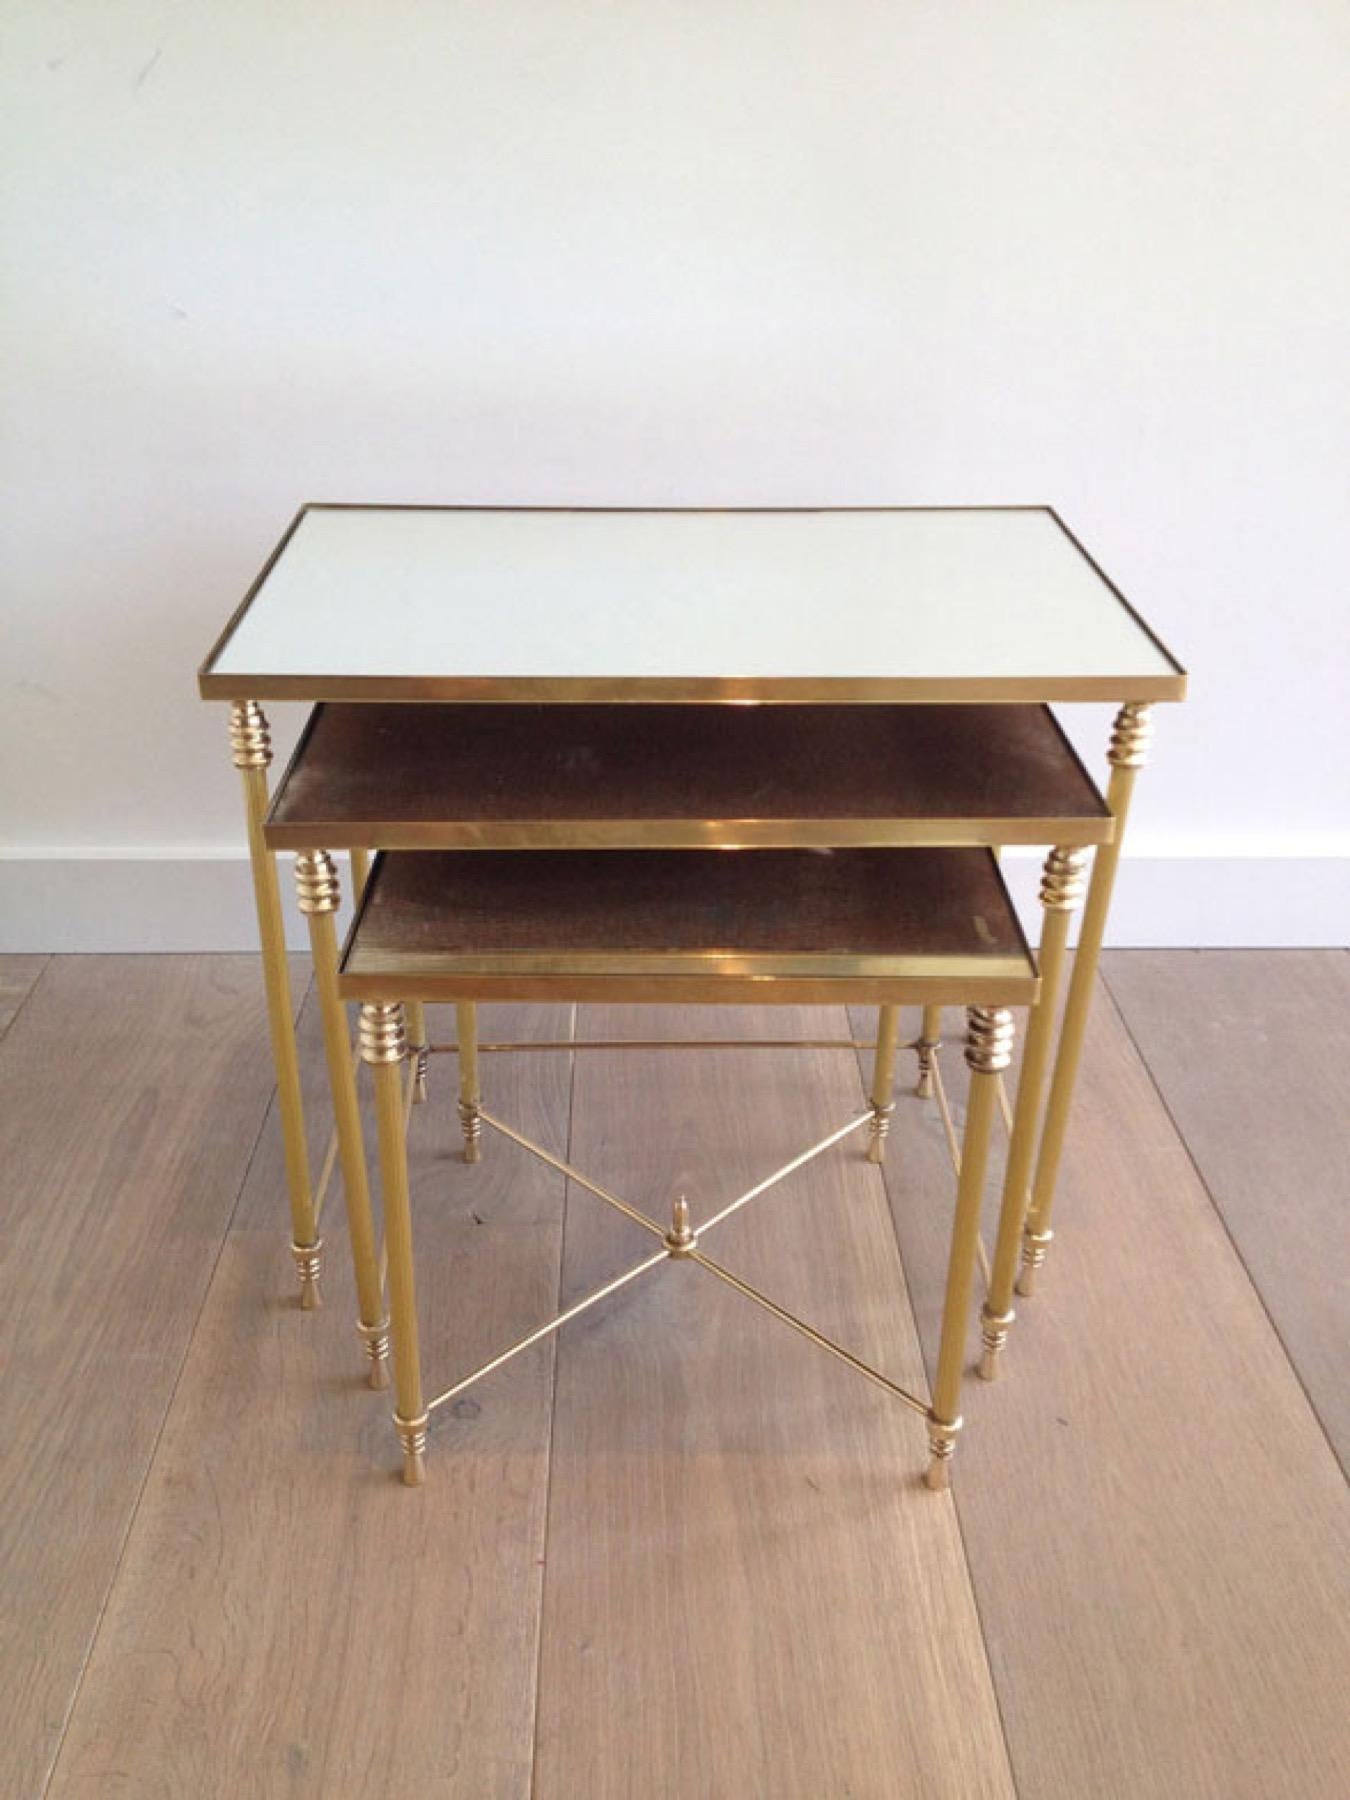 This set of 3 neoclassical style nesting tables is made of brass with mirror tops. This is a French work, in the style of famous designer Maison Jansen. Circa 1940.